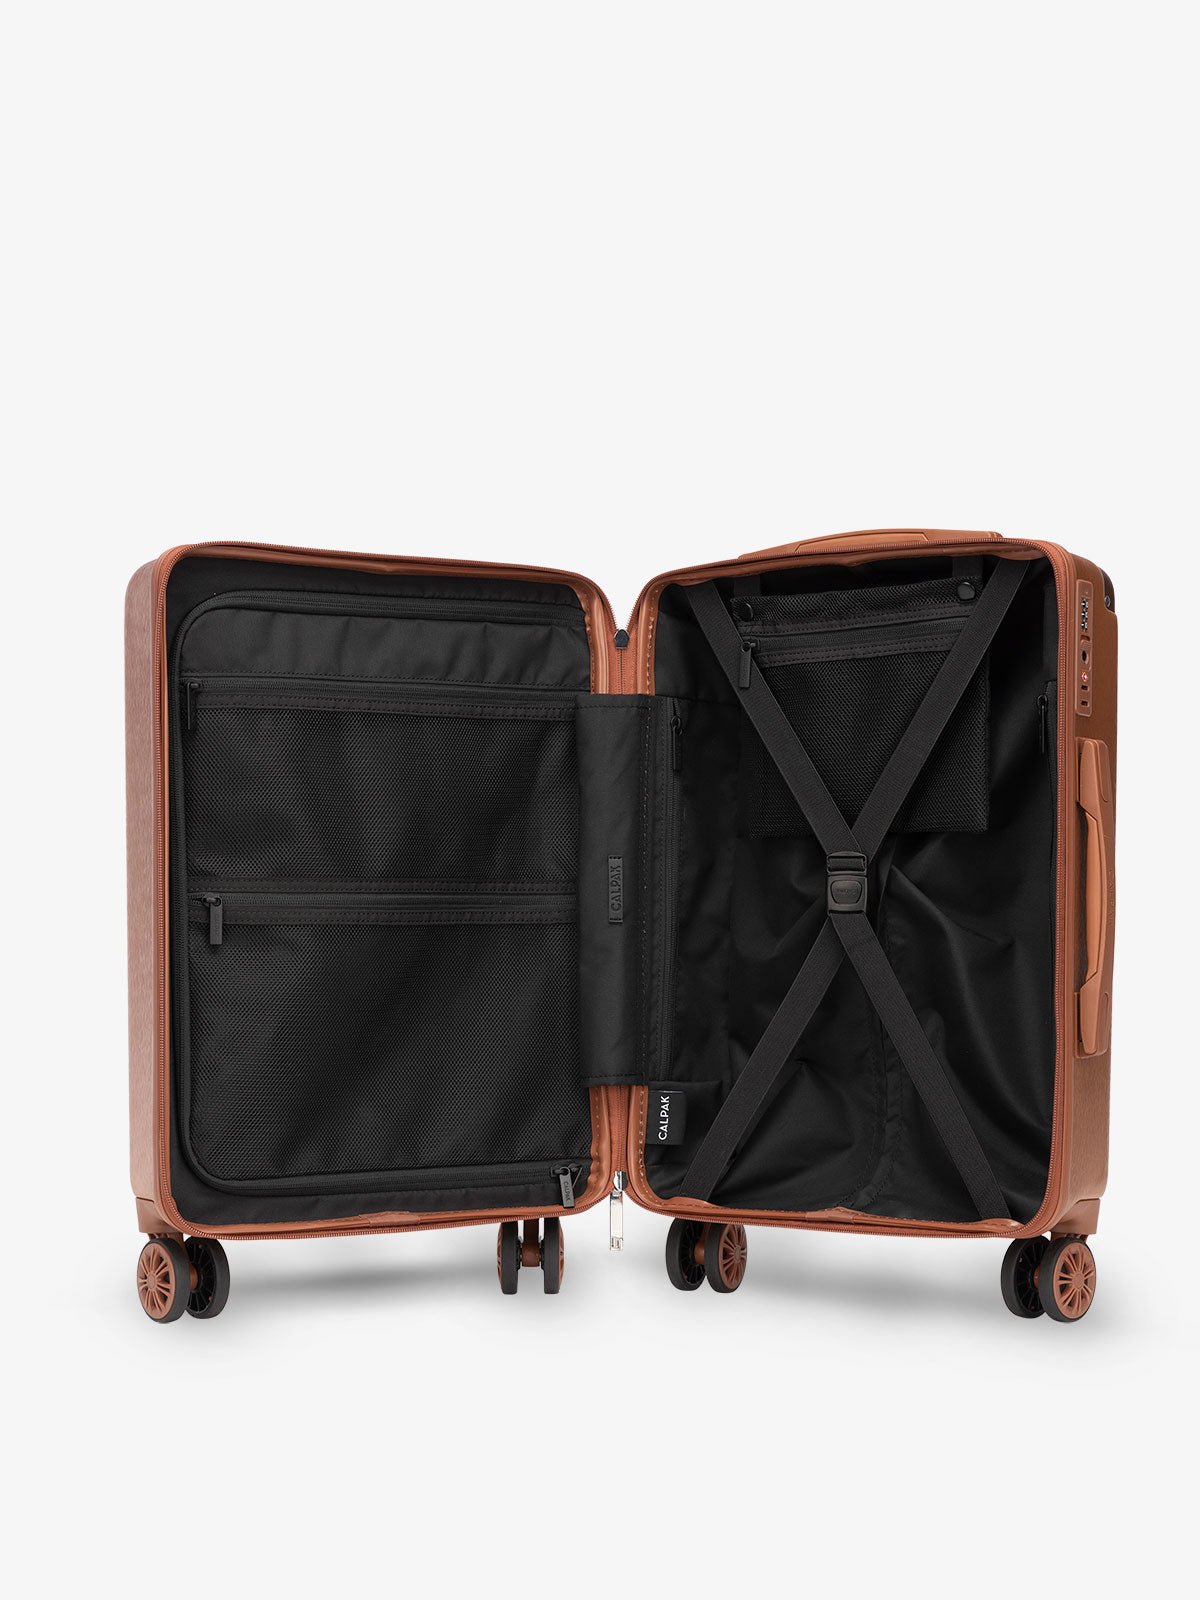 CALPAK Ambeur hard shell lightweight copper luggage with interior compression straps and multiple pockets